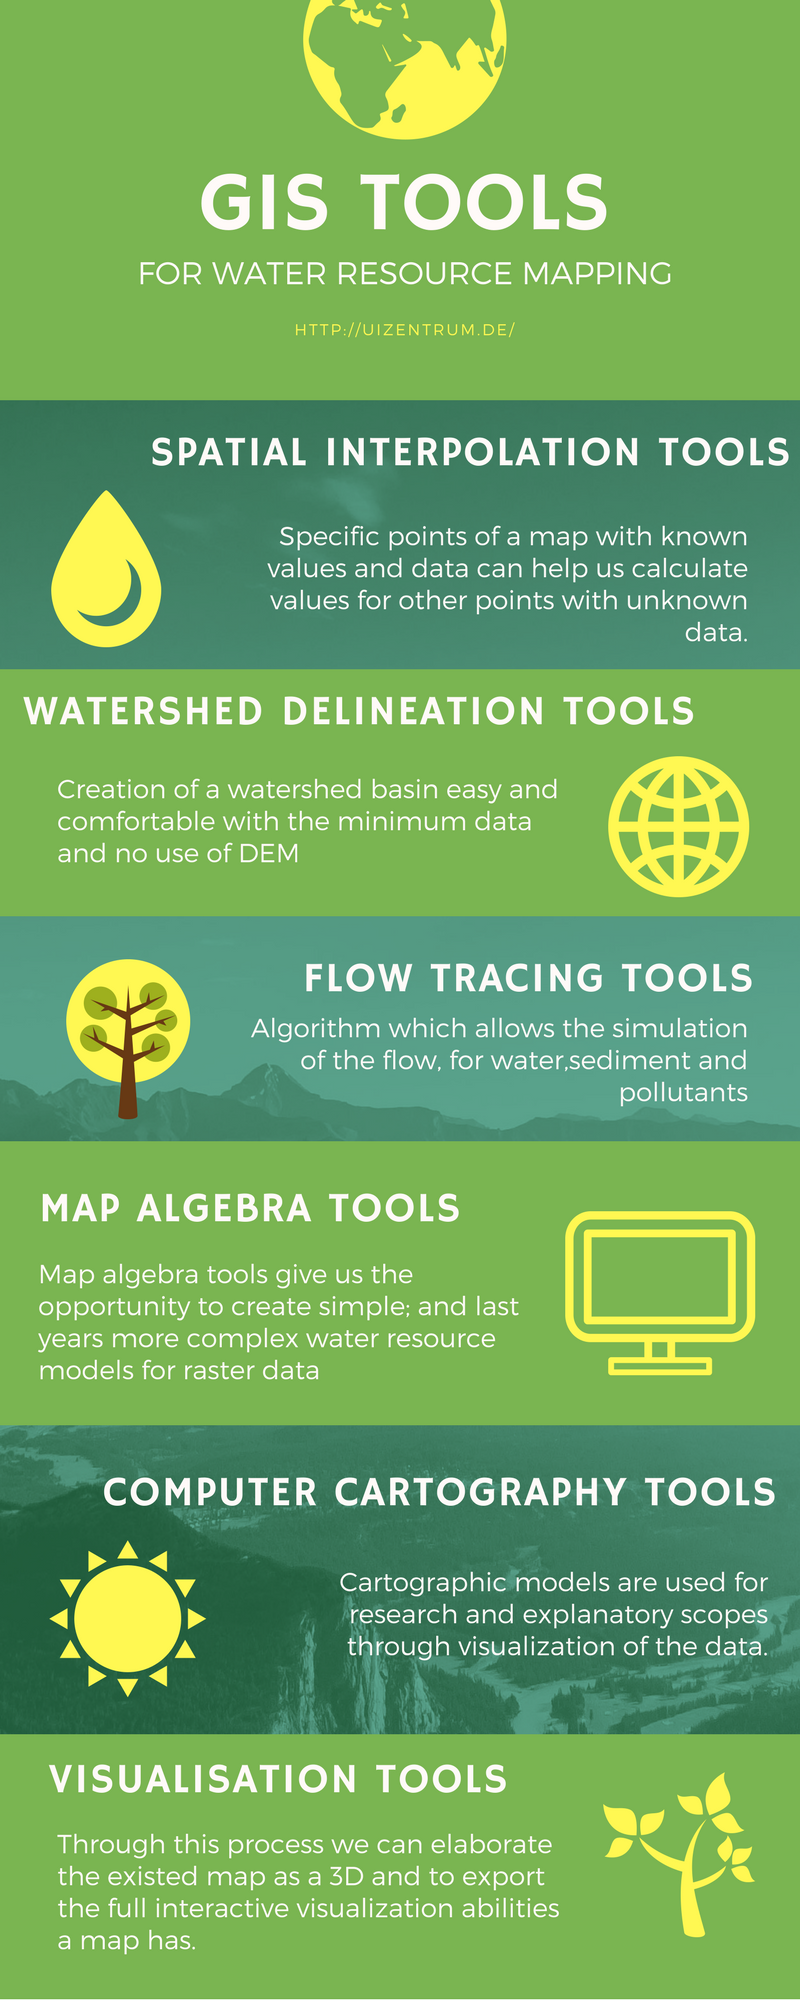 Tools we use in GIS for water resource mapping